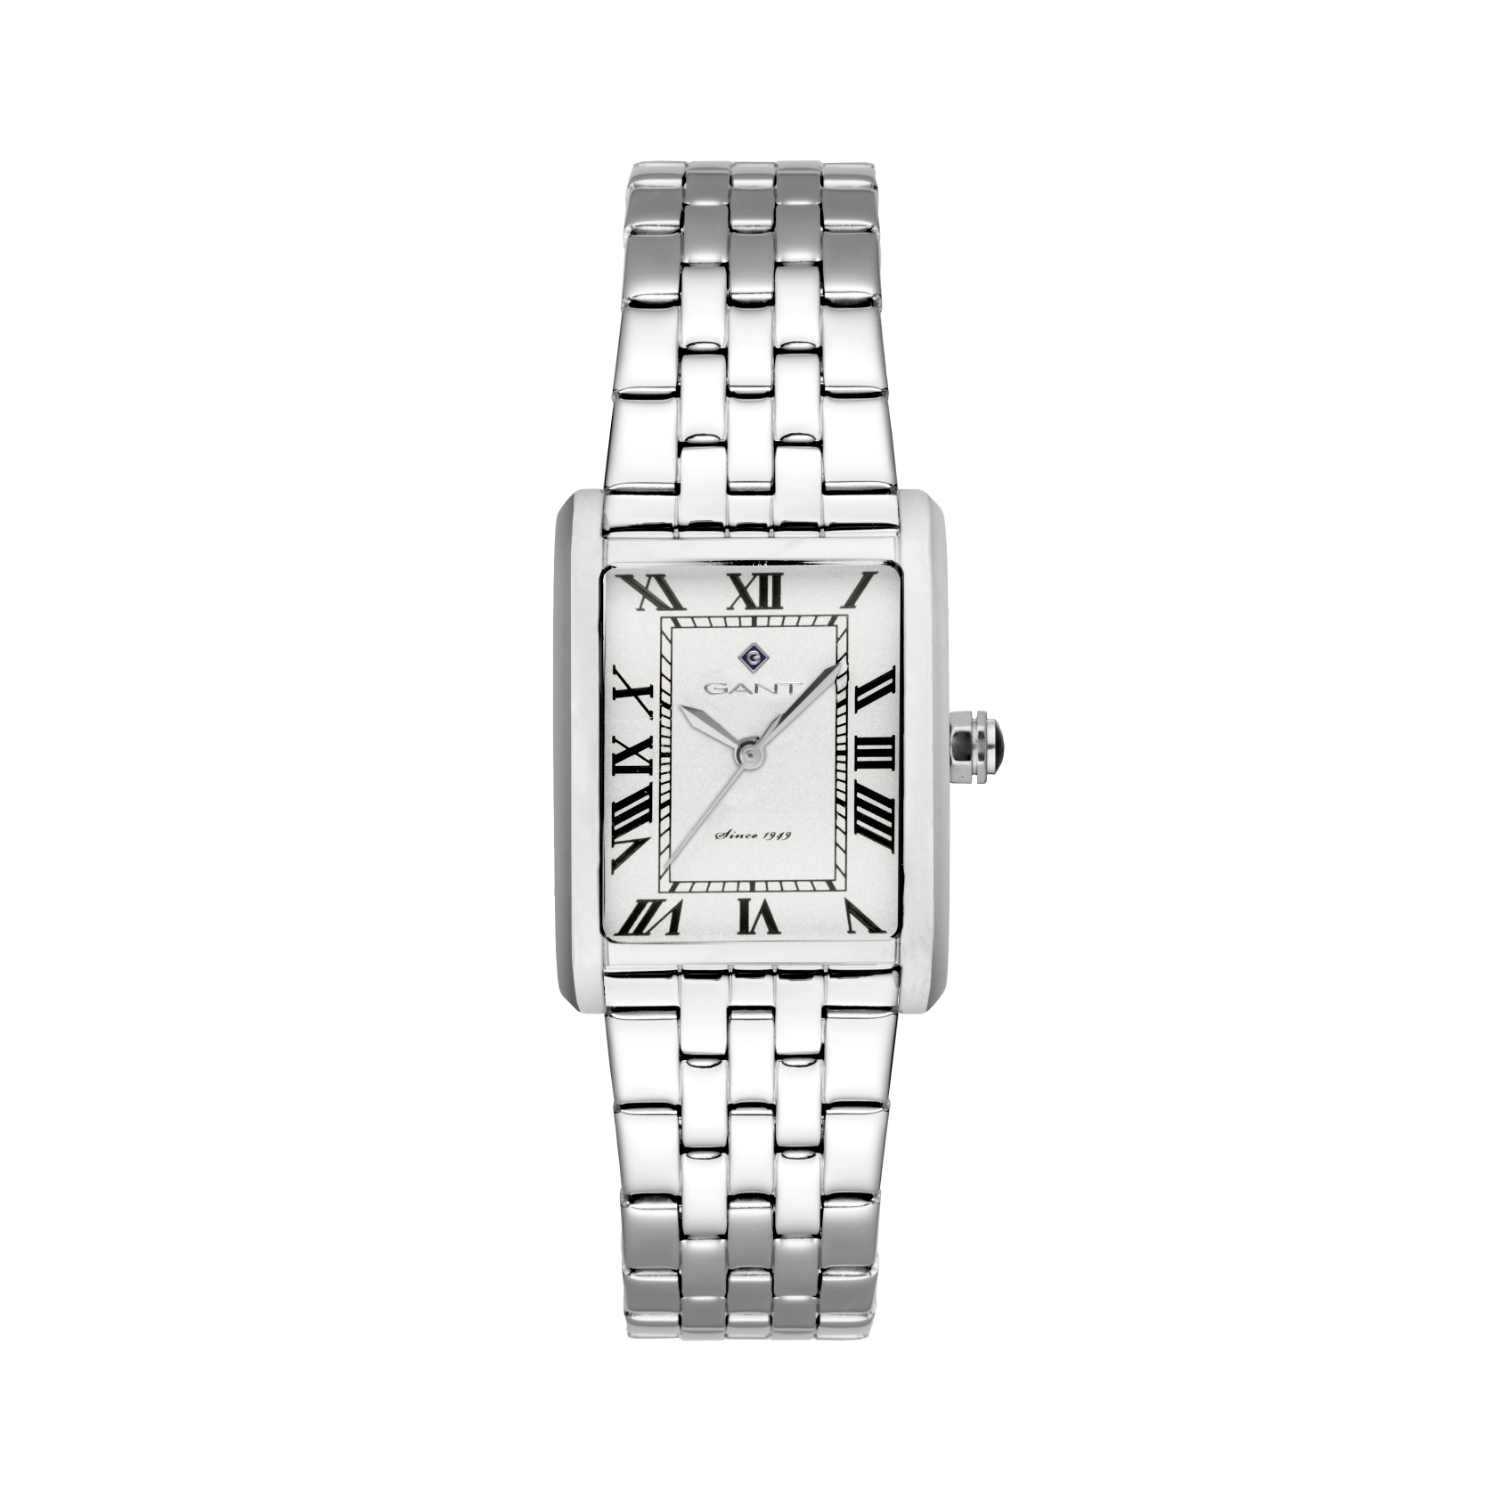 GANT womens watch in silver stainless steel with white dial and bracelet.